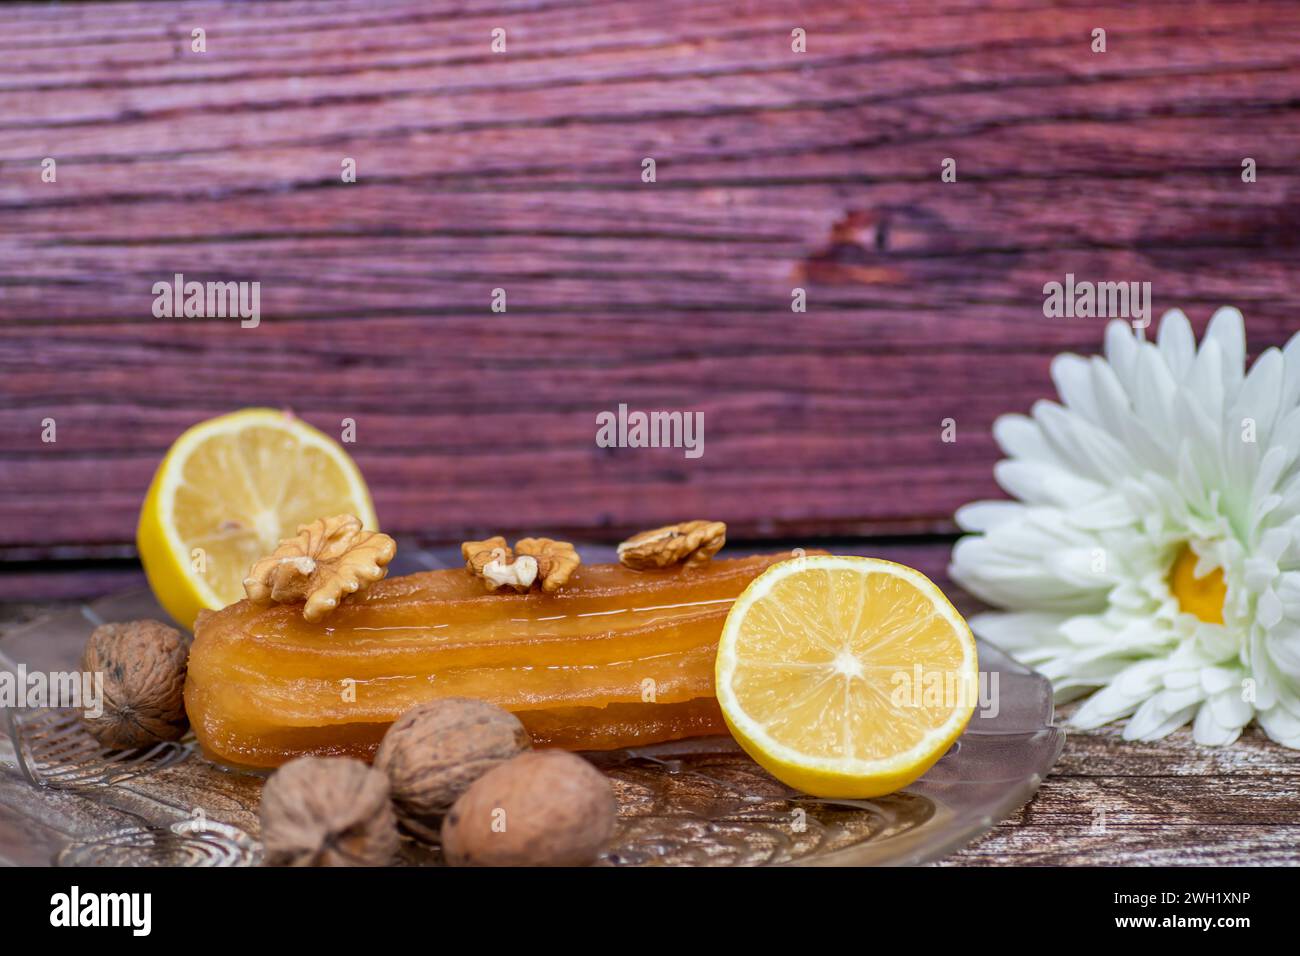 Turkish sweet cake called tulumba, served at plate with sliced of lemon and nuts around, on massive wooden table Stock Photo